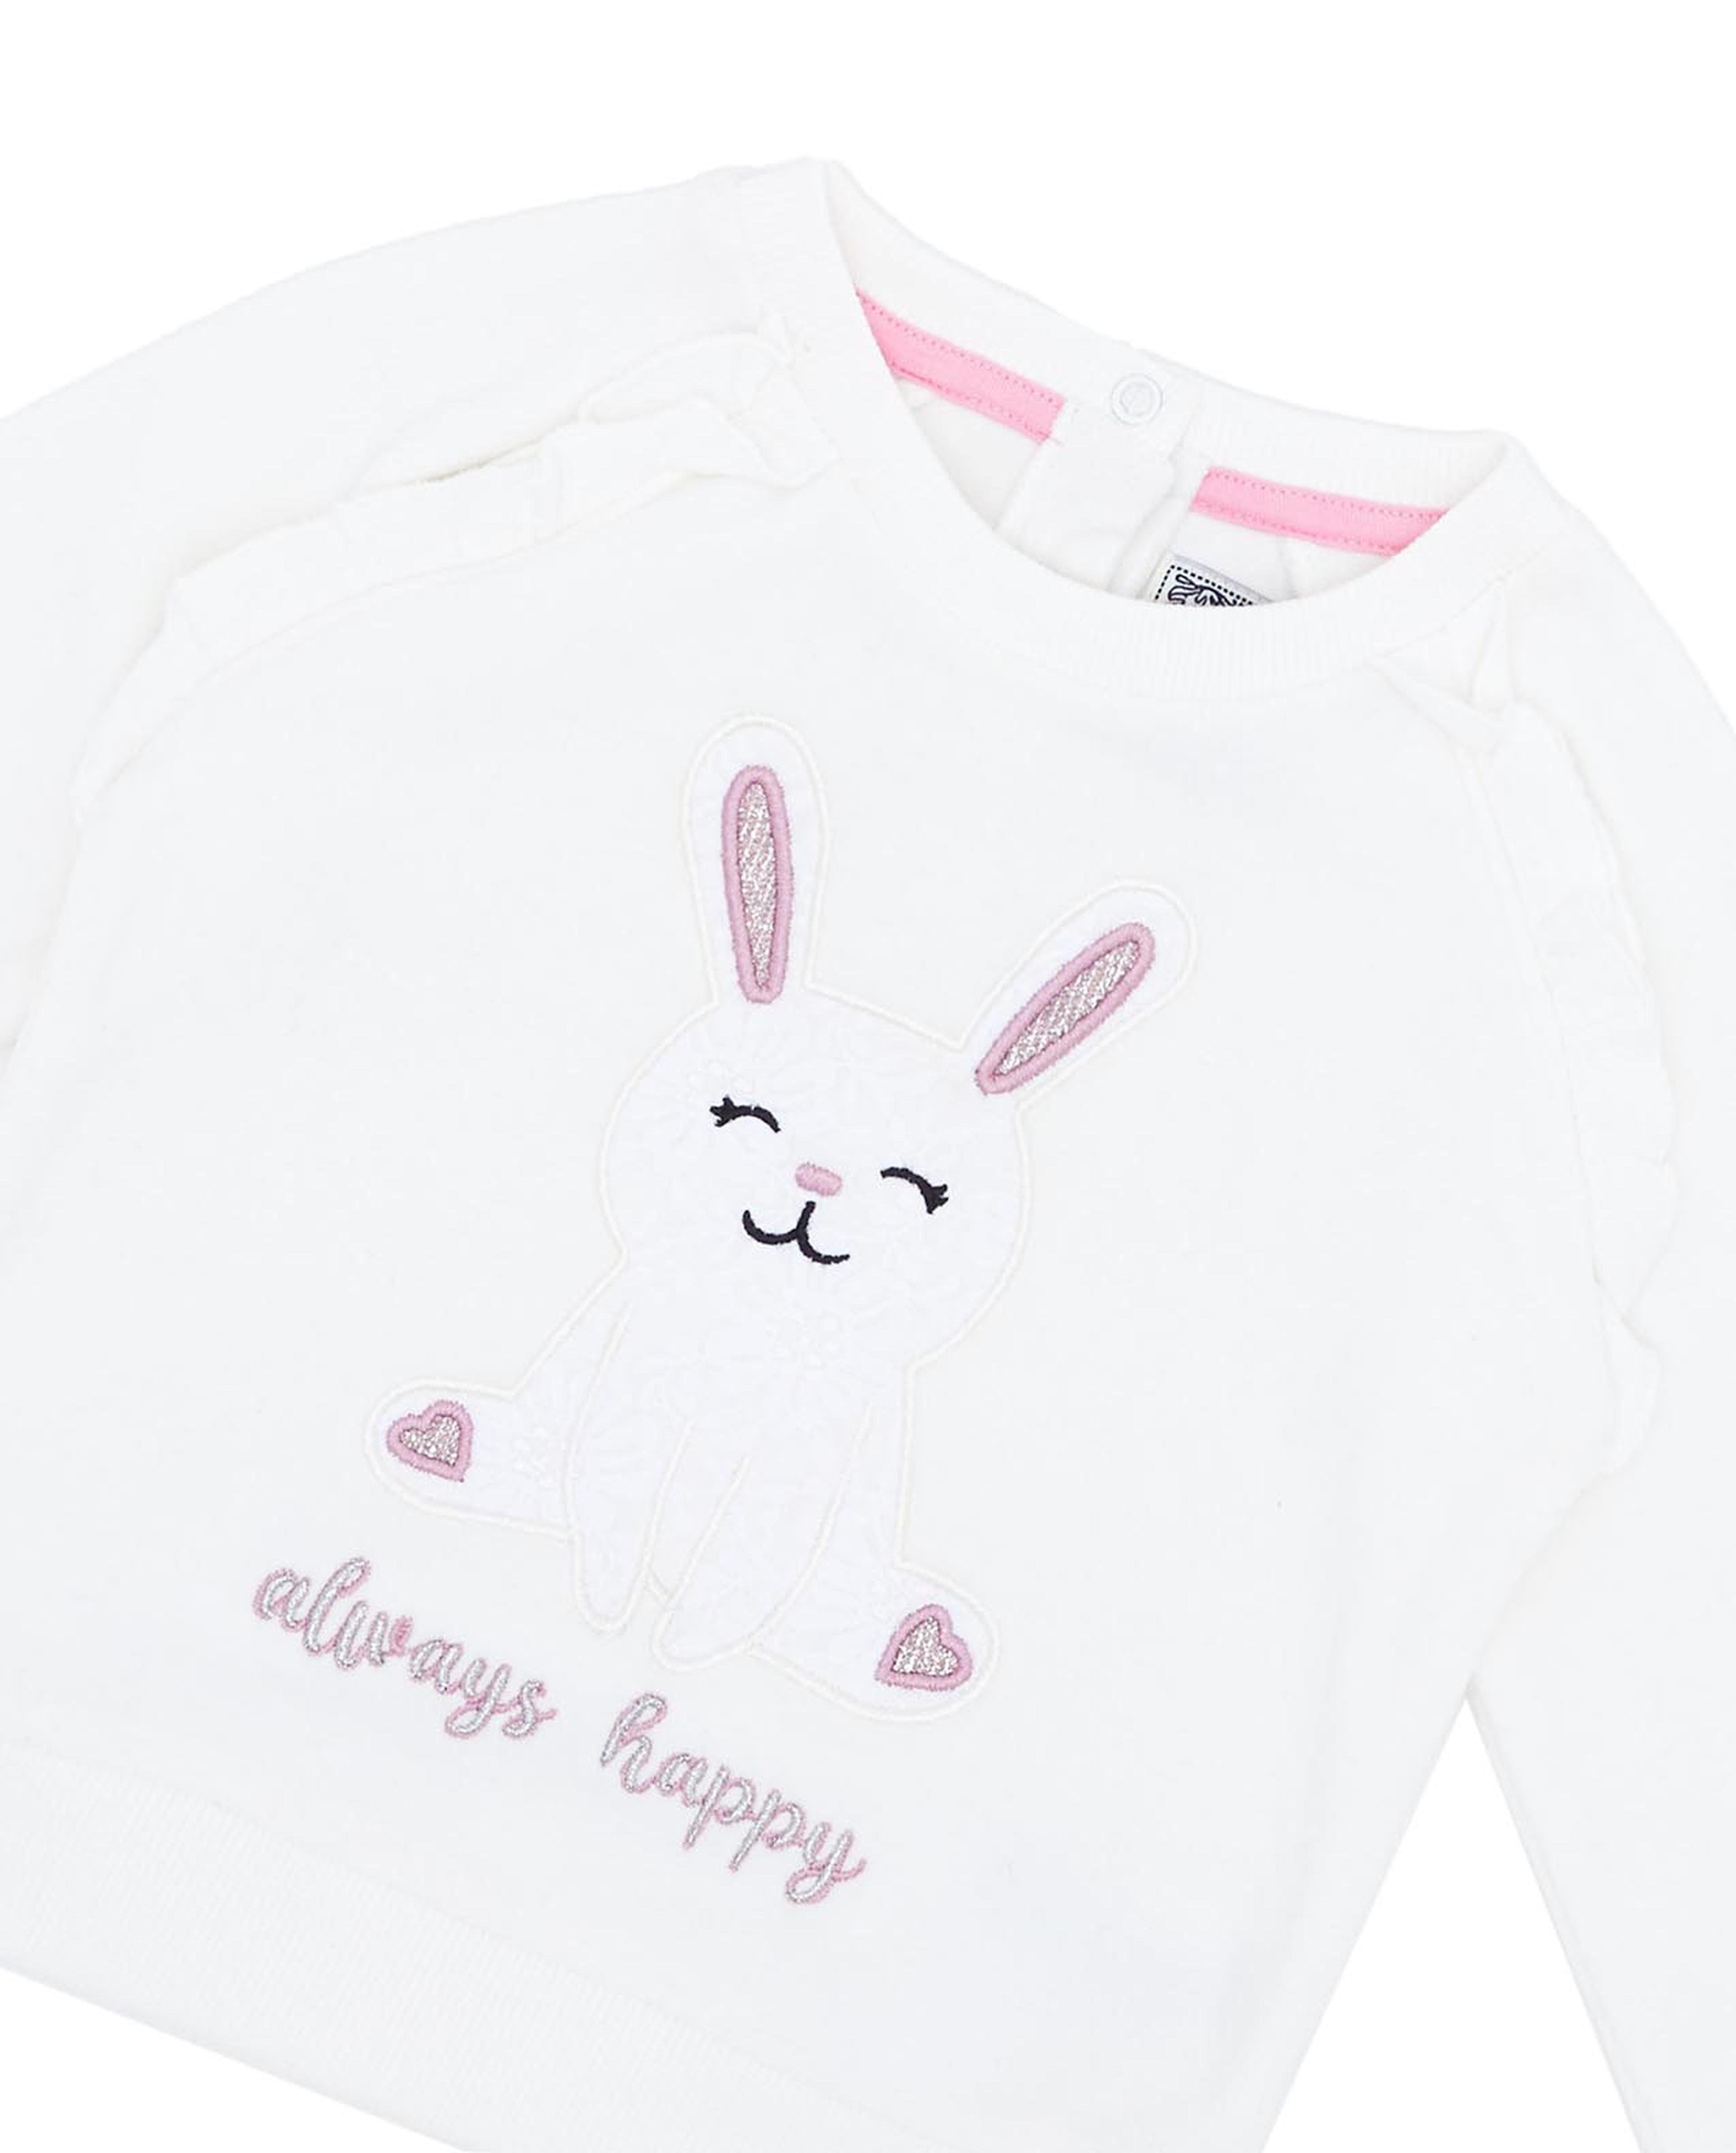 Bunny Applique Sweatshirt with Crew Neck and Long Sleeves